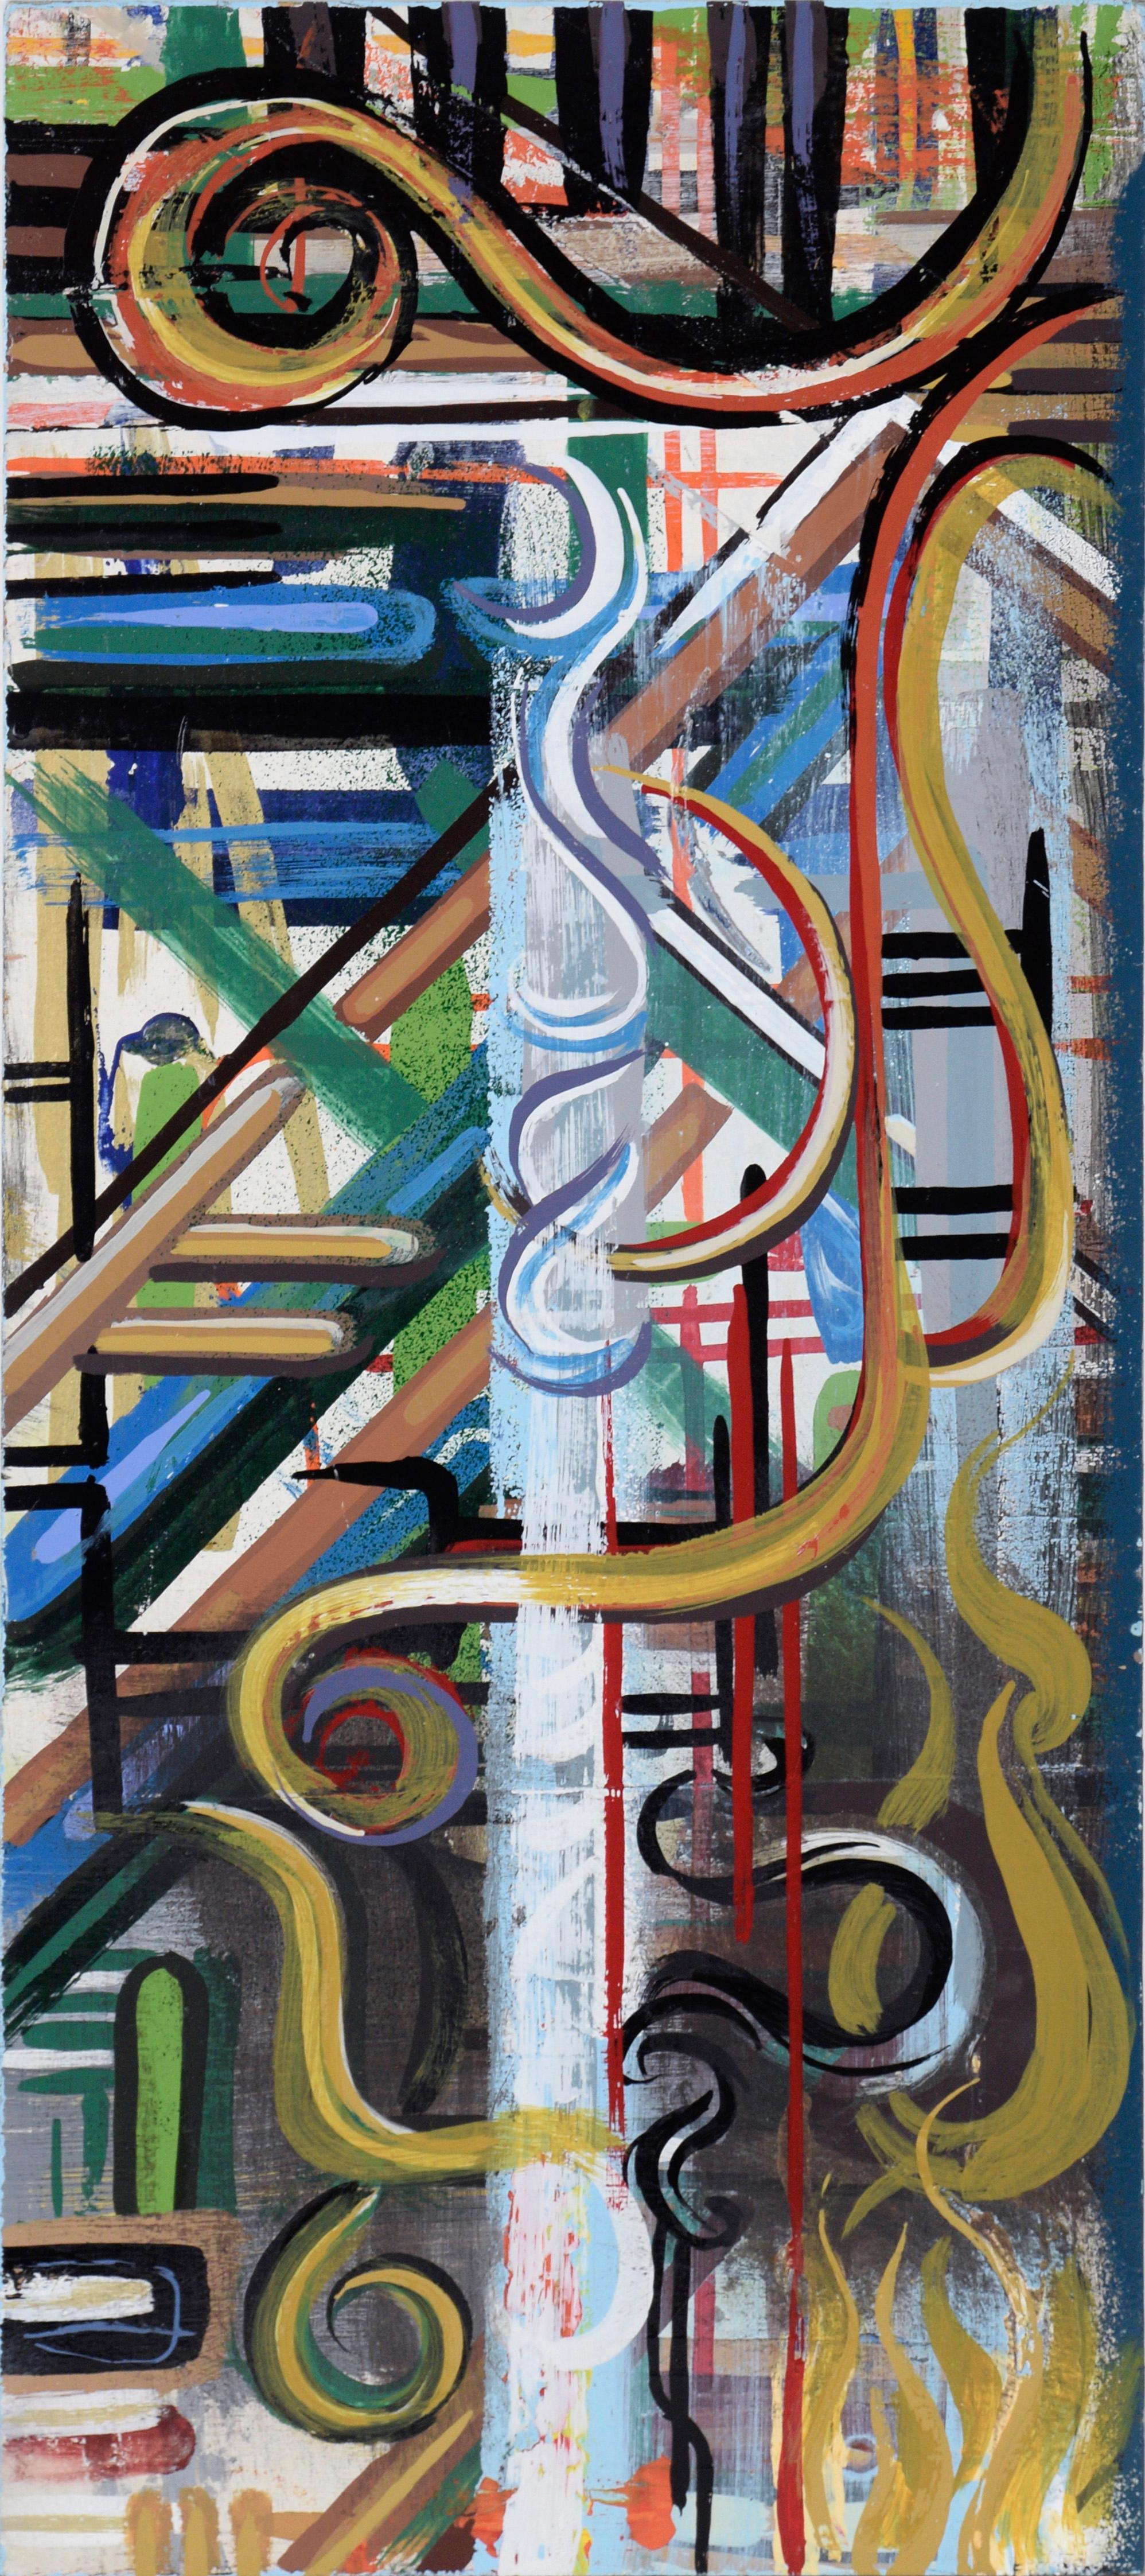 Sam Dantone Abstract Painting - "Ab-scrap" - Abstract Geometric Composition in Acrylic on Wood Panel